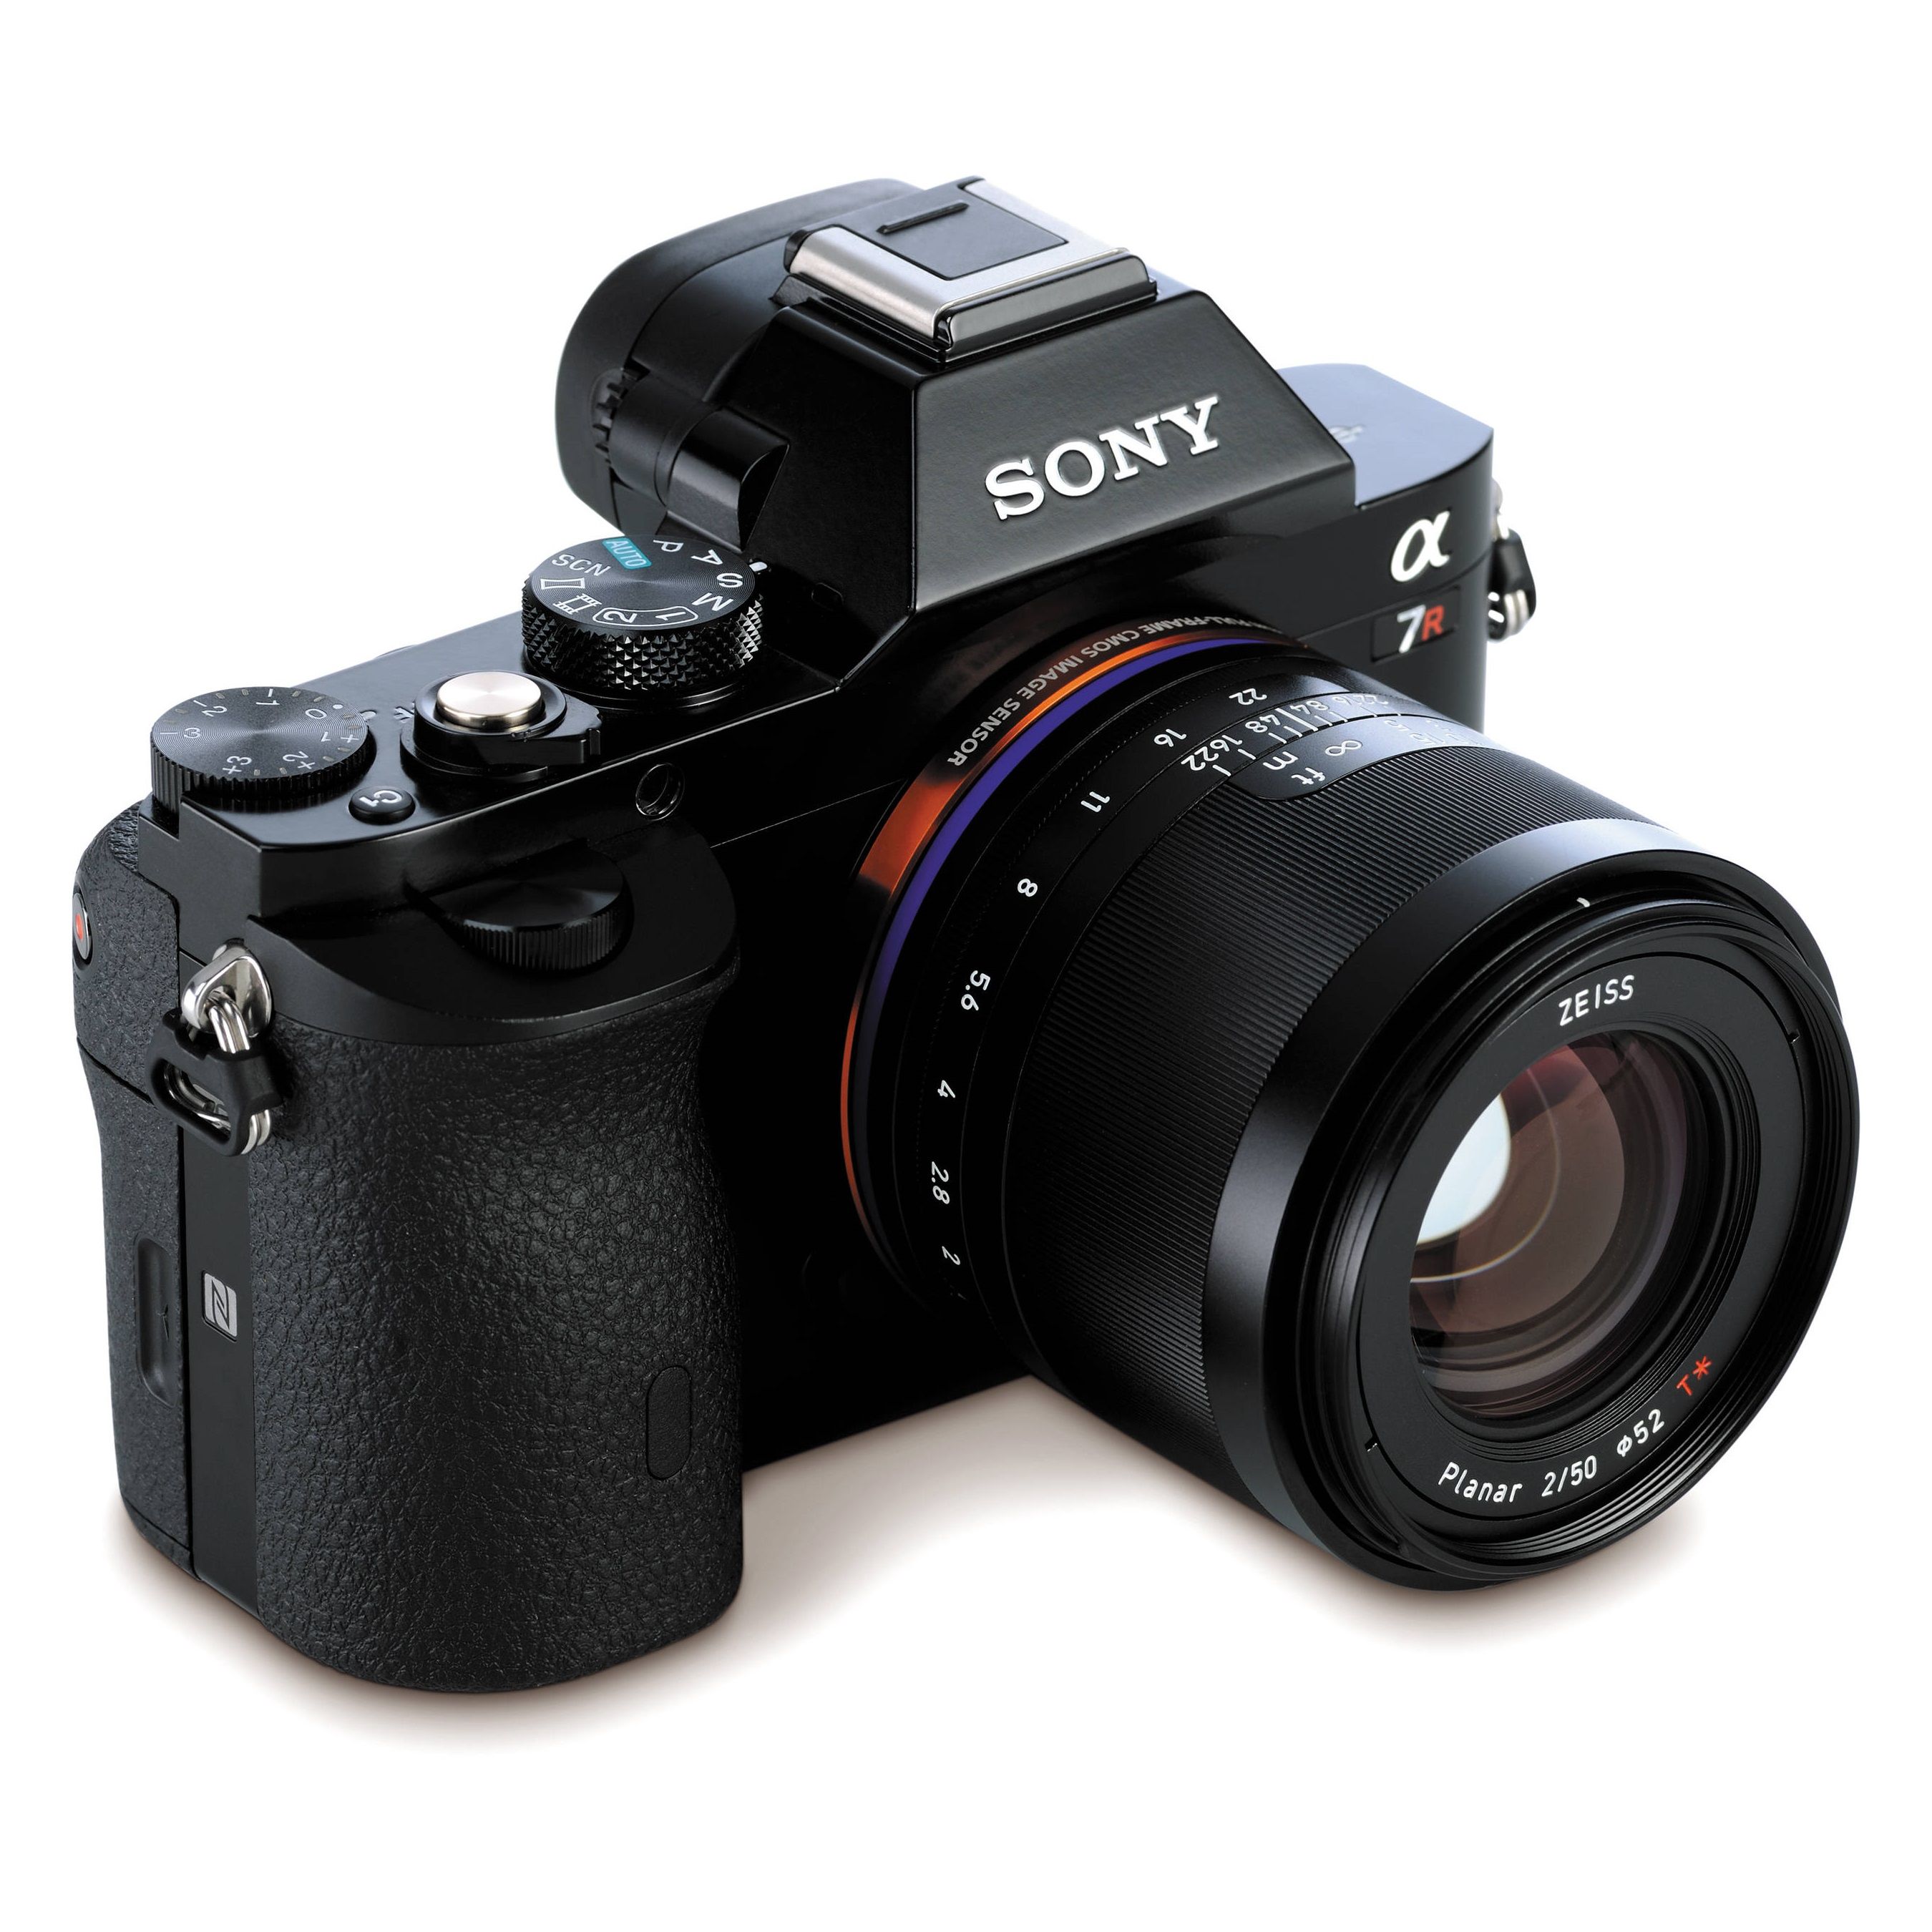 Zeiss Loxia 50mm f/2.0 Lens for Sony E-Mount